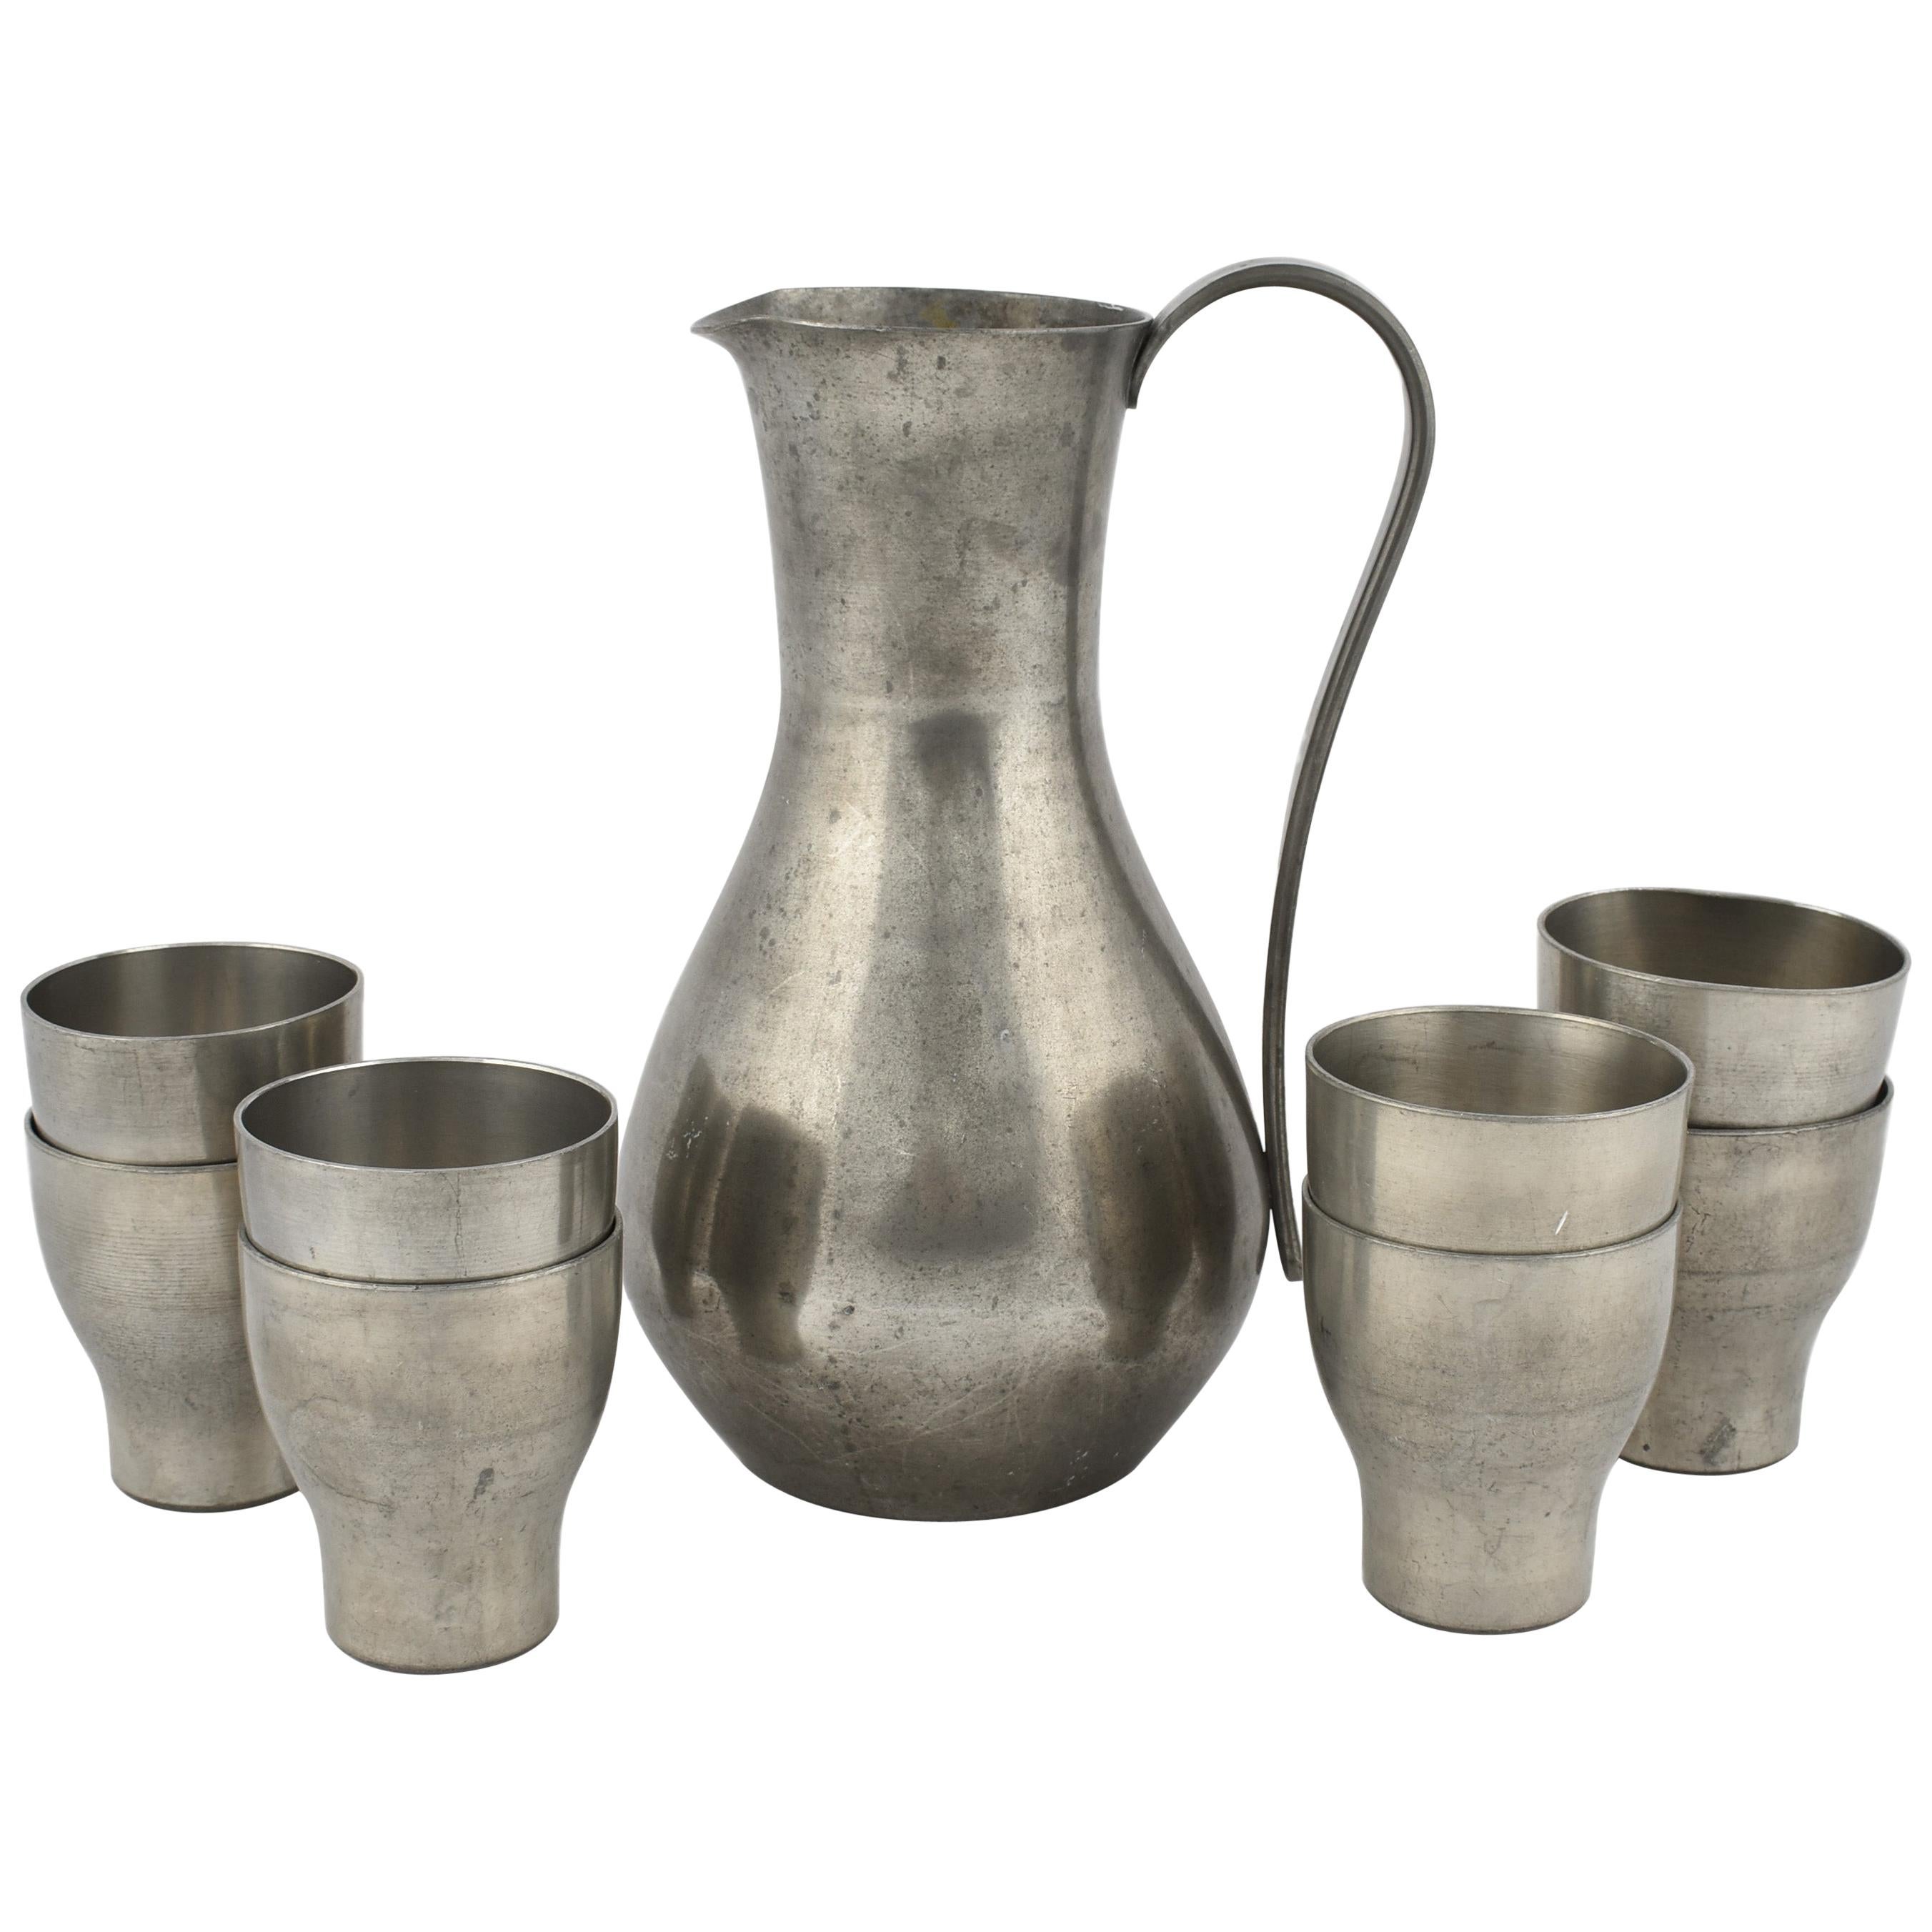 Vintage Pewter Pitcher with Cups by Harald Buchrucker, Germany, 1960s